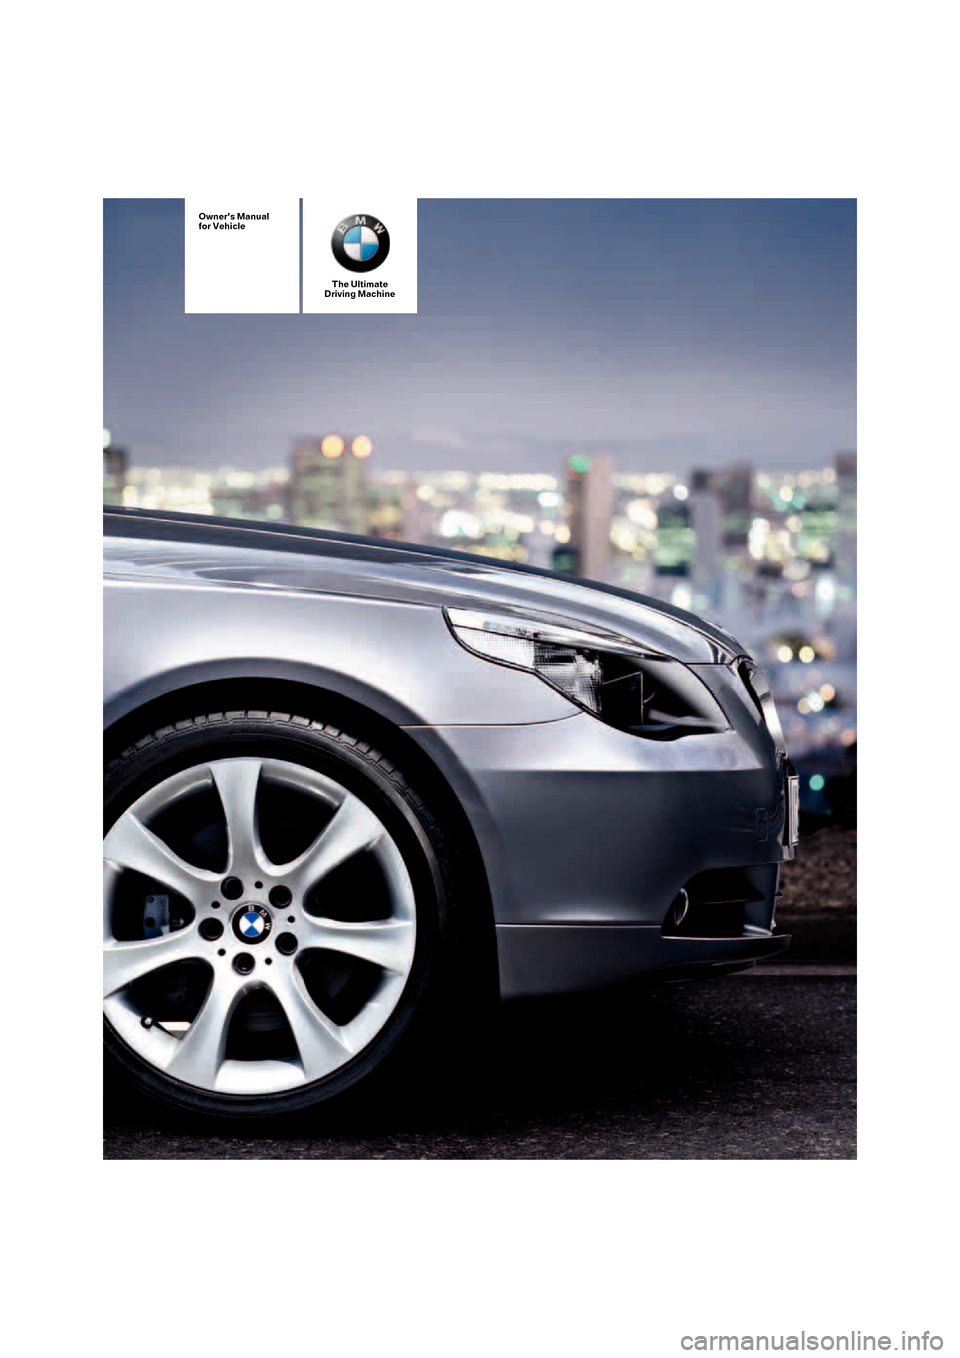 BMW 550I TOURING 2006 E61 Owners Manual The Ultimate
Driving Machine
Owners Manual
for Vehicle 